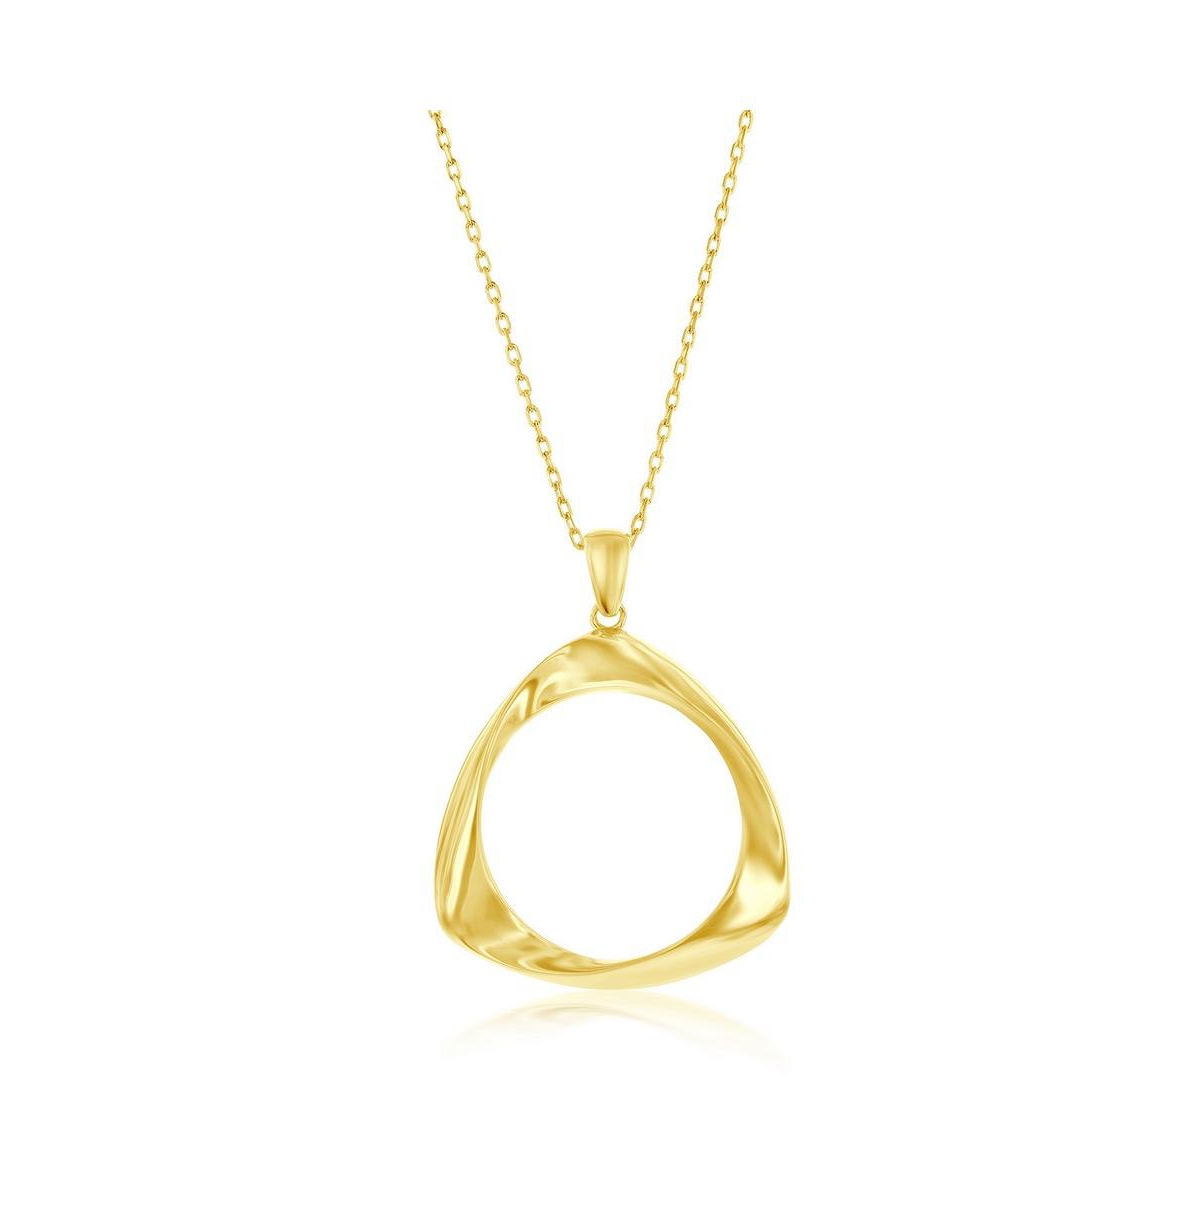 Gold Plated Over Sterling Silver High Polished Twist Triangle Pendant Necklace - Gold